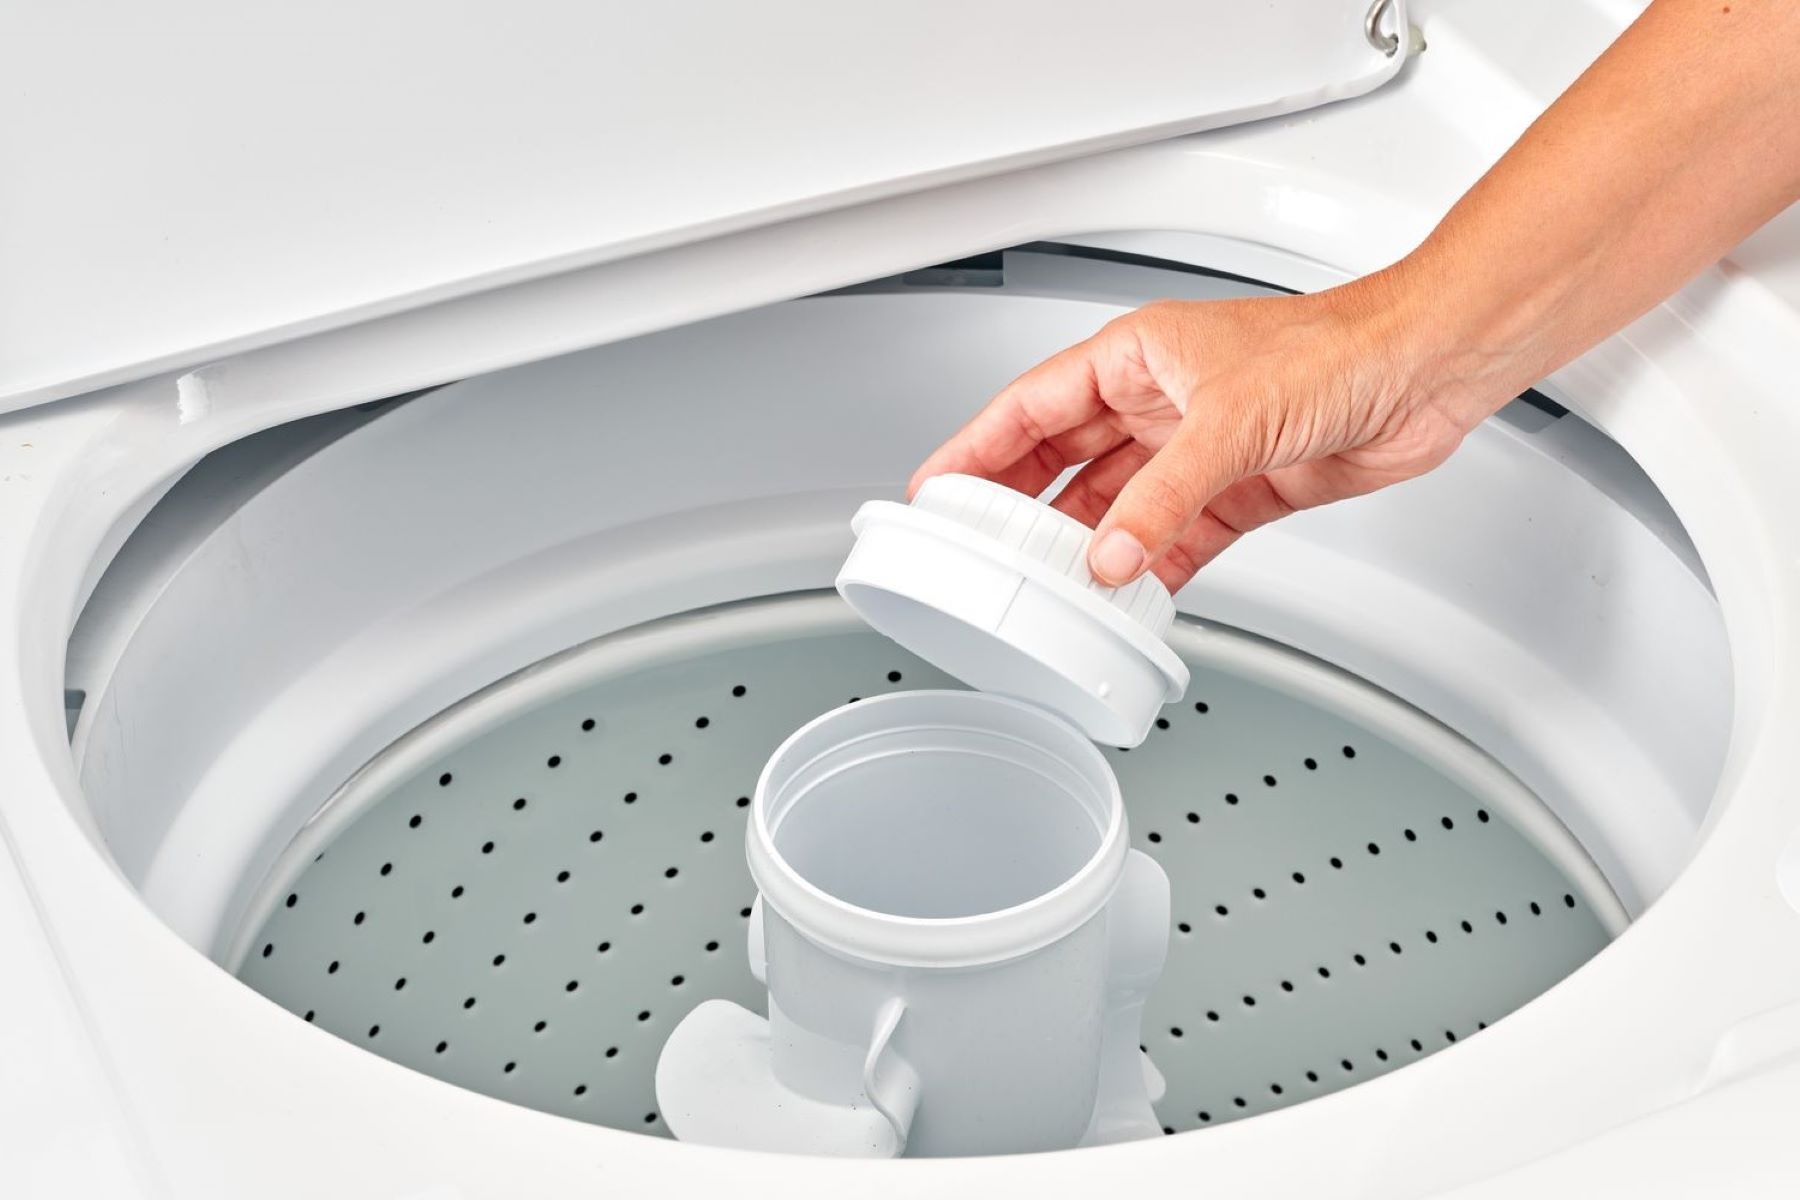 How To Remove The Agitator From A Maytag Washing Machine